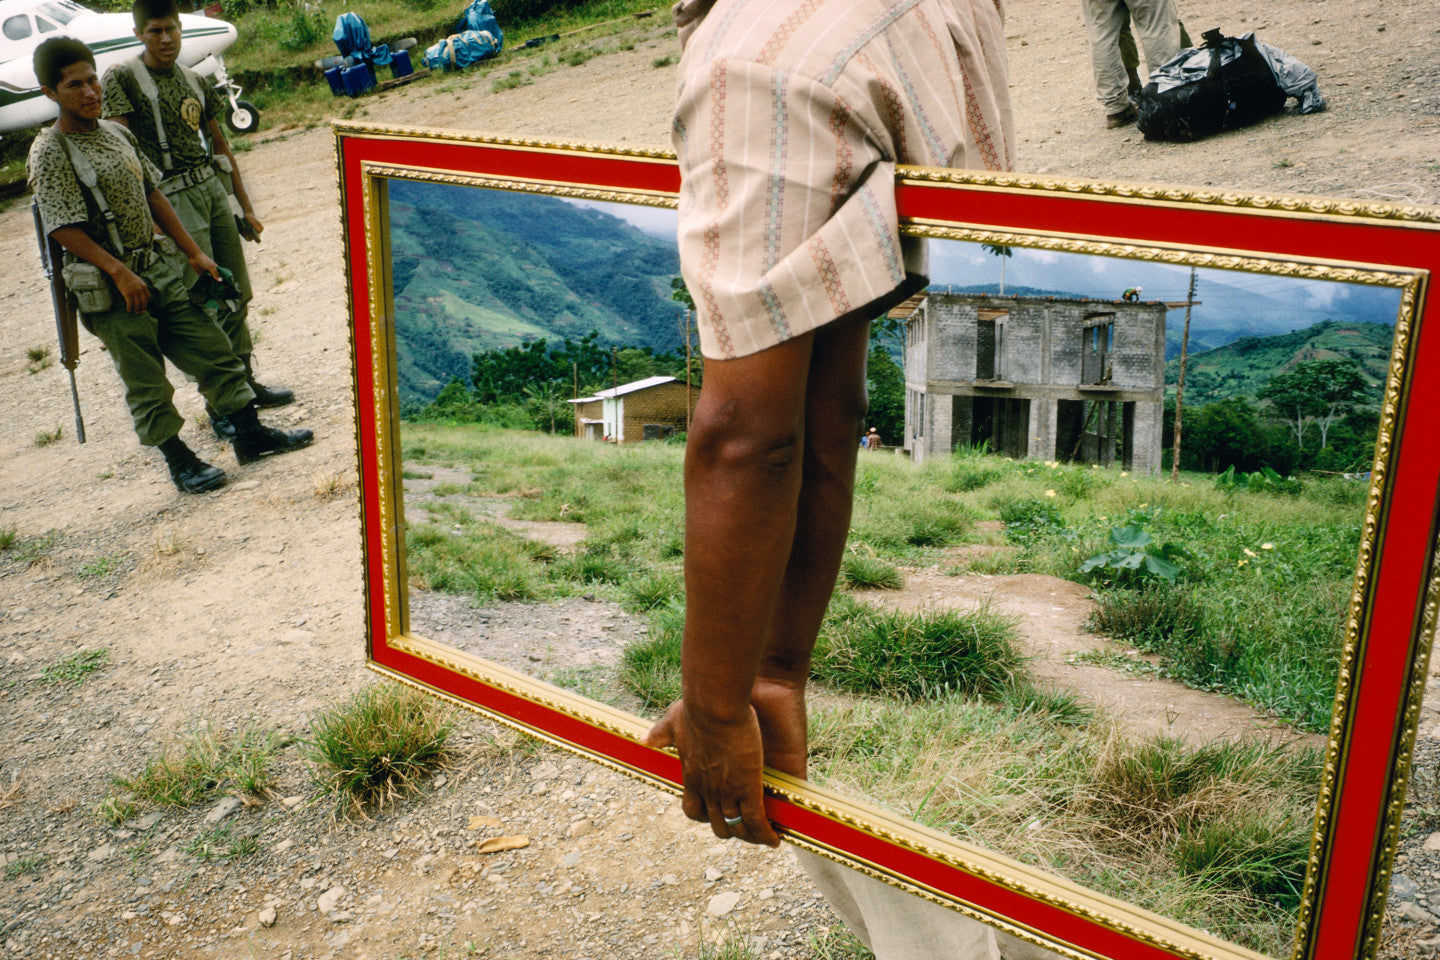 Alex Webb — Amazon: From the Floodplains to the Clouds